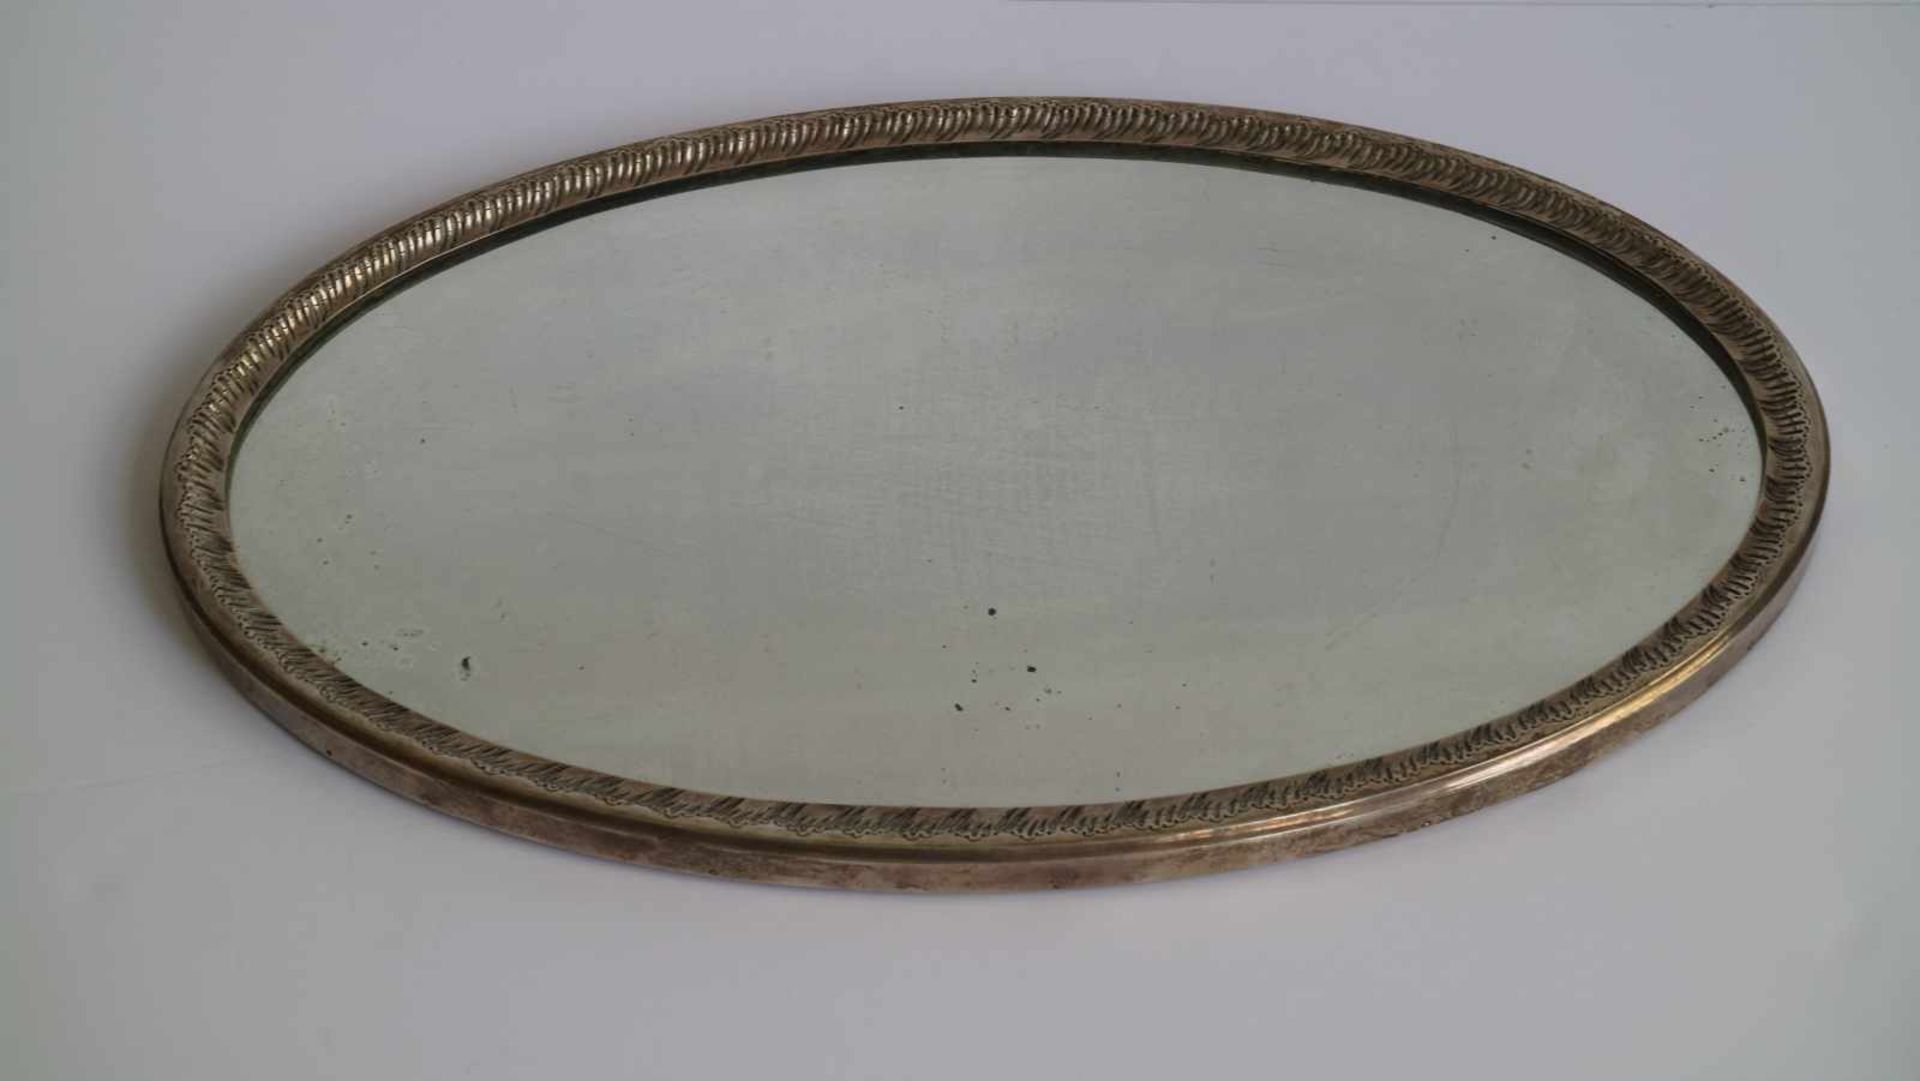 Delheid tray silver platter with mirror glass (Delheid) + silver plated dish, bowl and spoon 51 x - Image 4 of 4